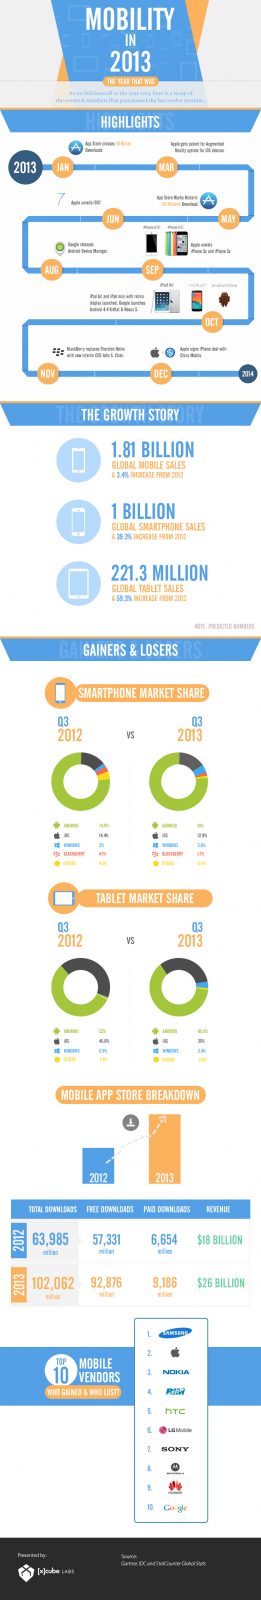 Mobility in 2013 - Infographic by [x]cube LABS